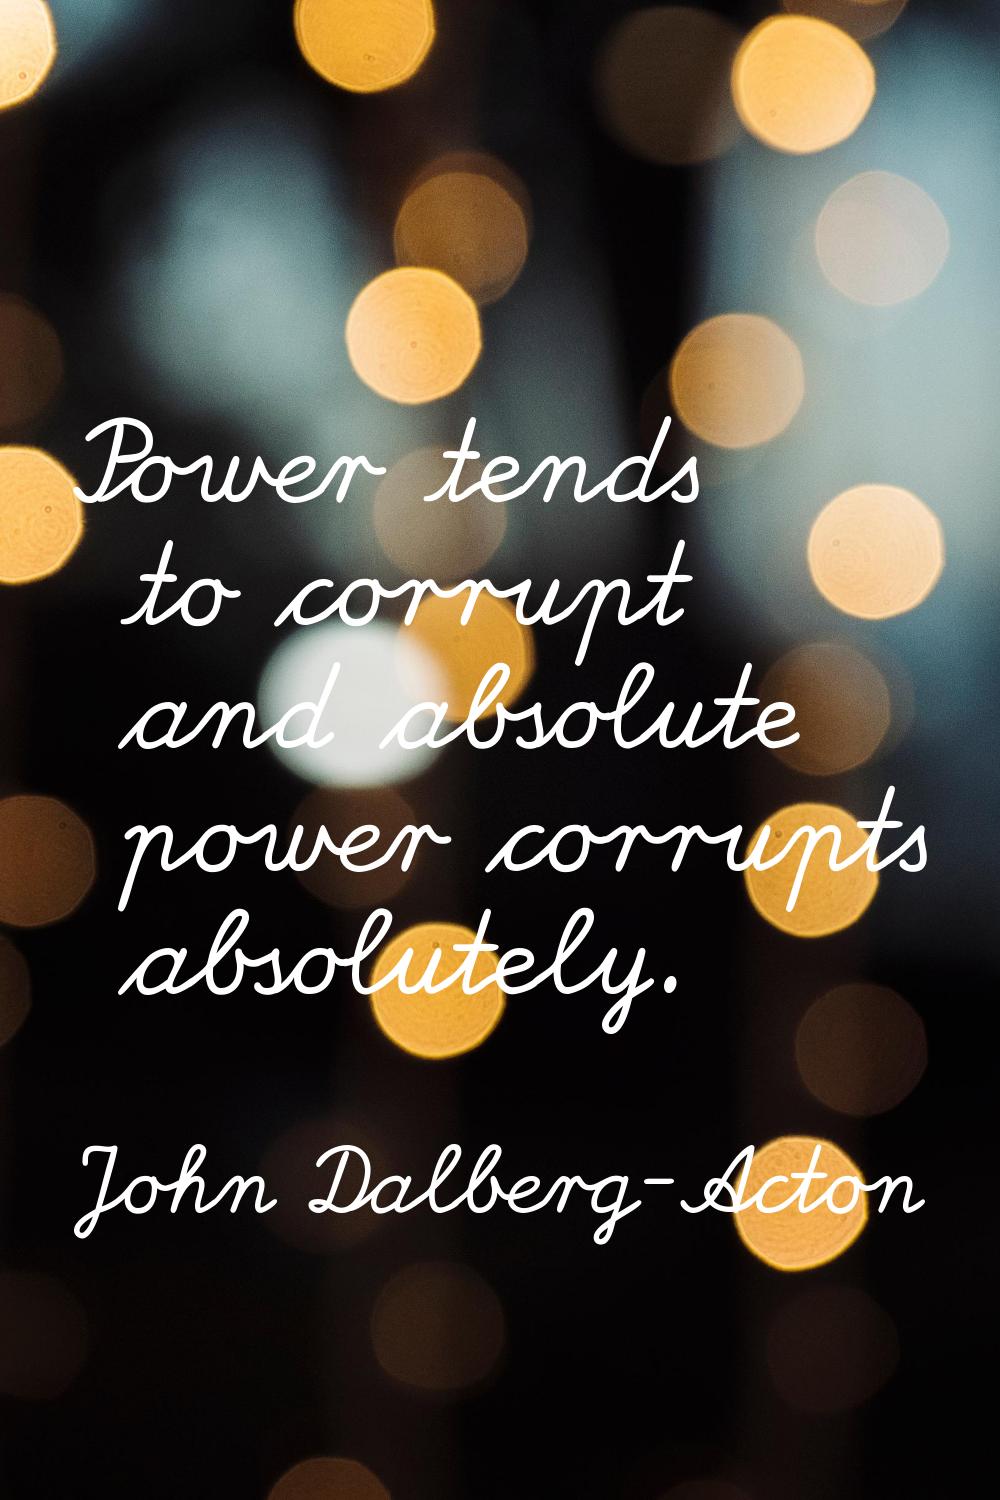 Power tends to corrupt and absolute power corrupts absolutely.